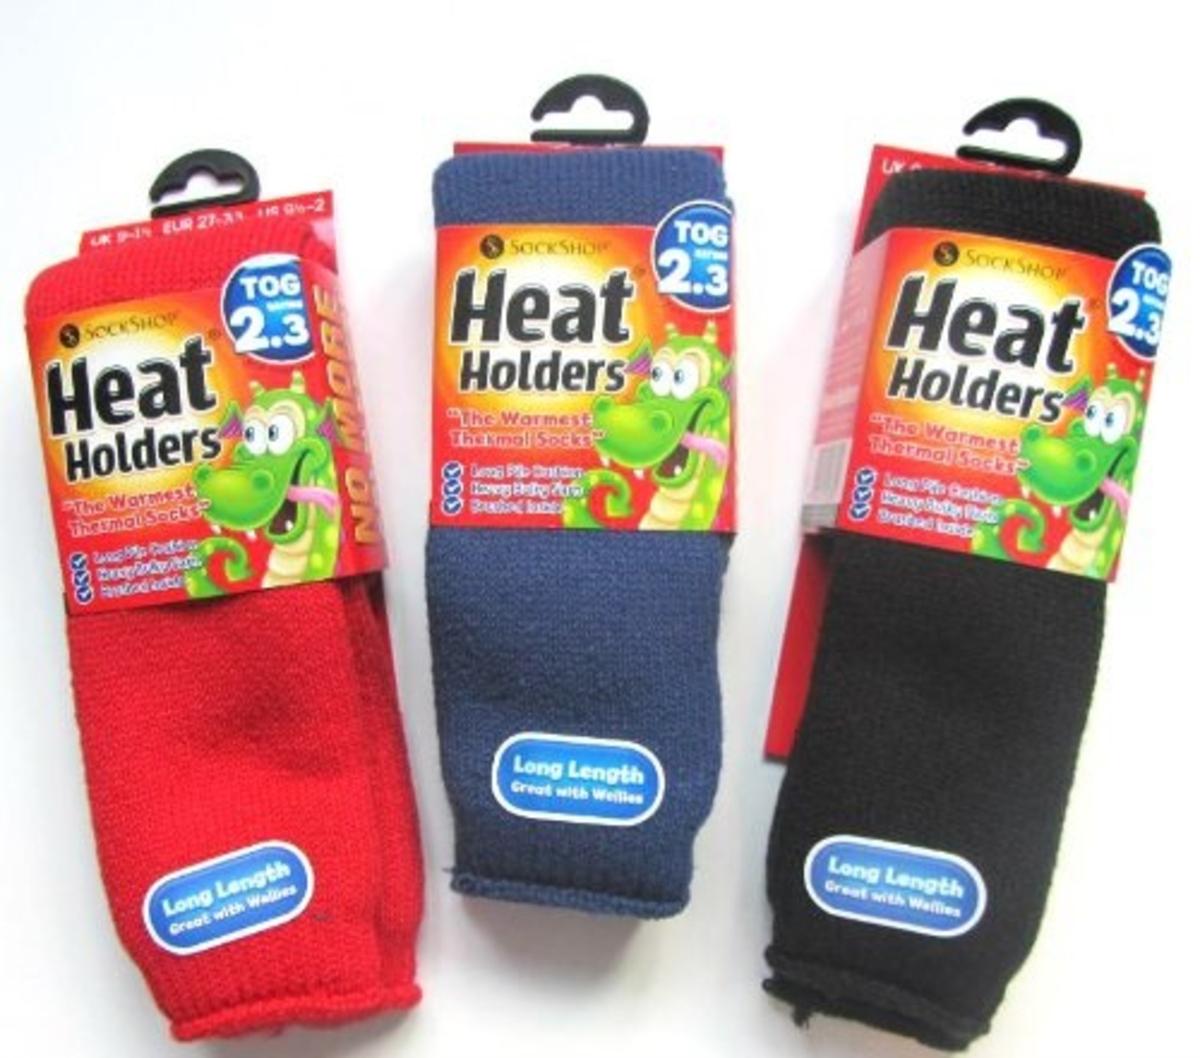 Kids Childrens Thick Winter Warm Colorful 2.3 TOG Thermal Socks Heat Holders